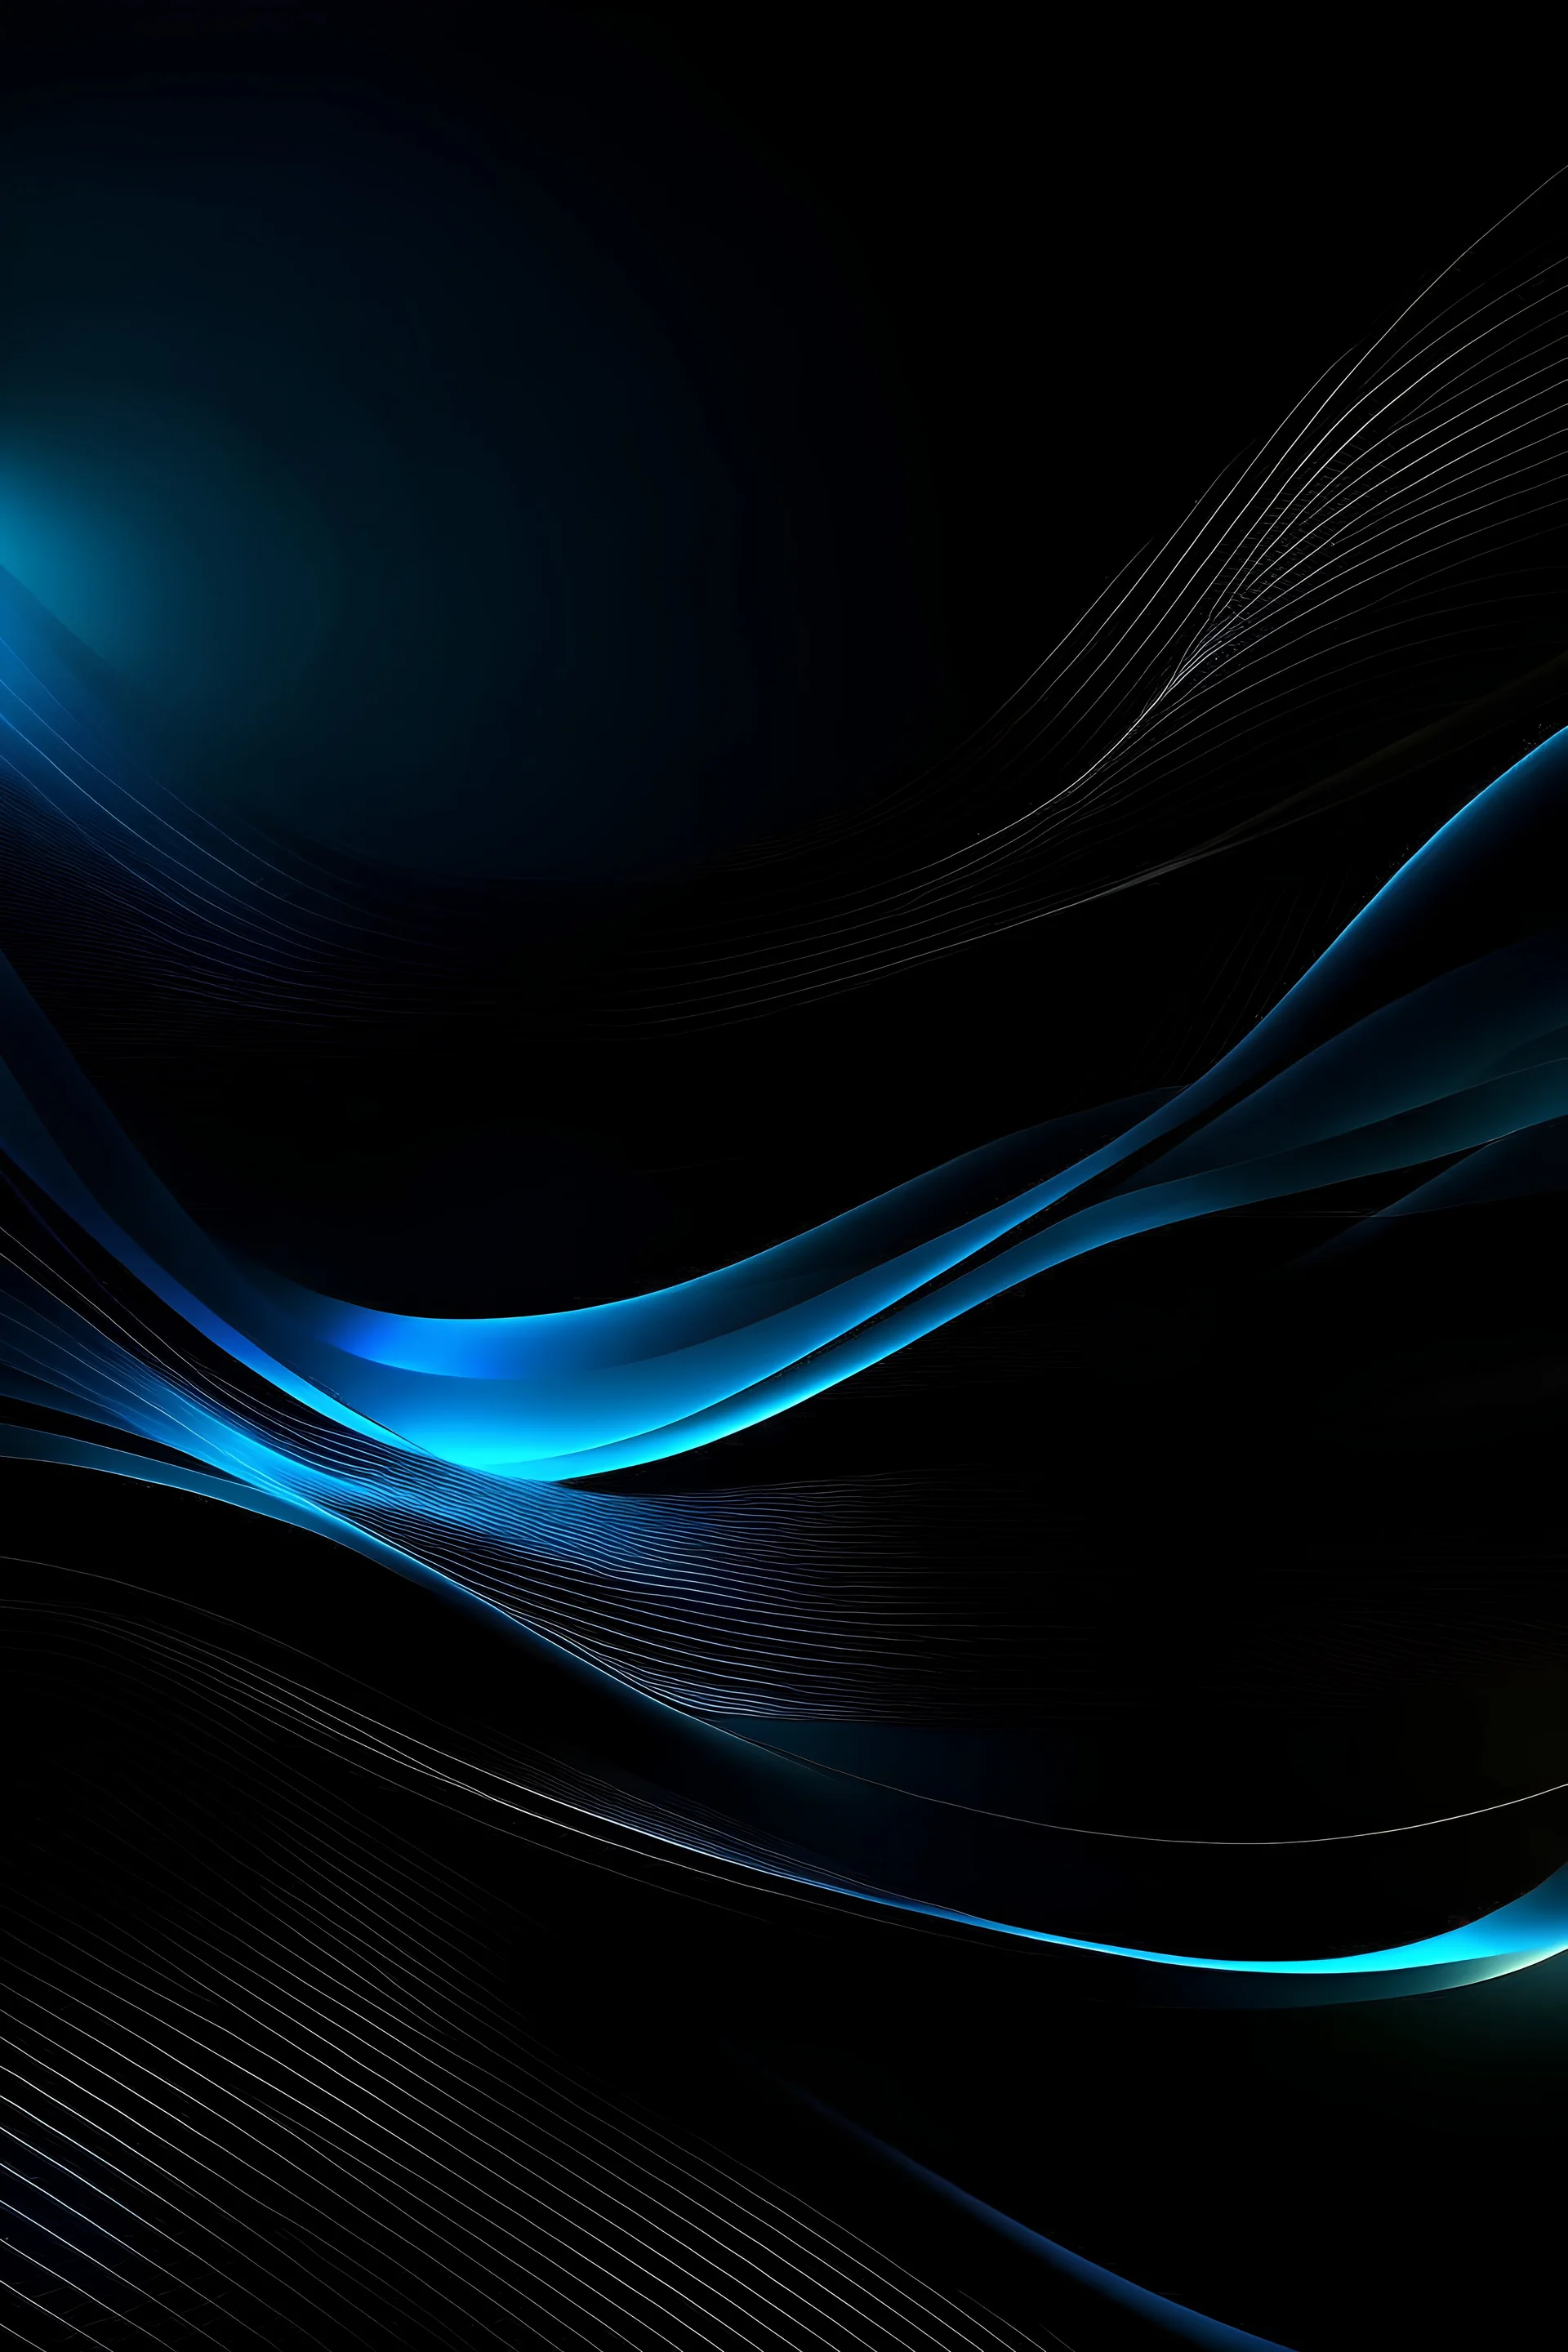 smooth abstract futuristic background that looks ai data like. shades of blue and black